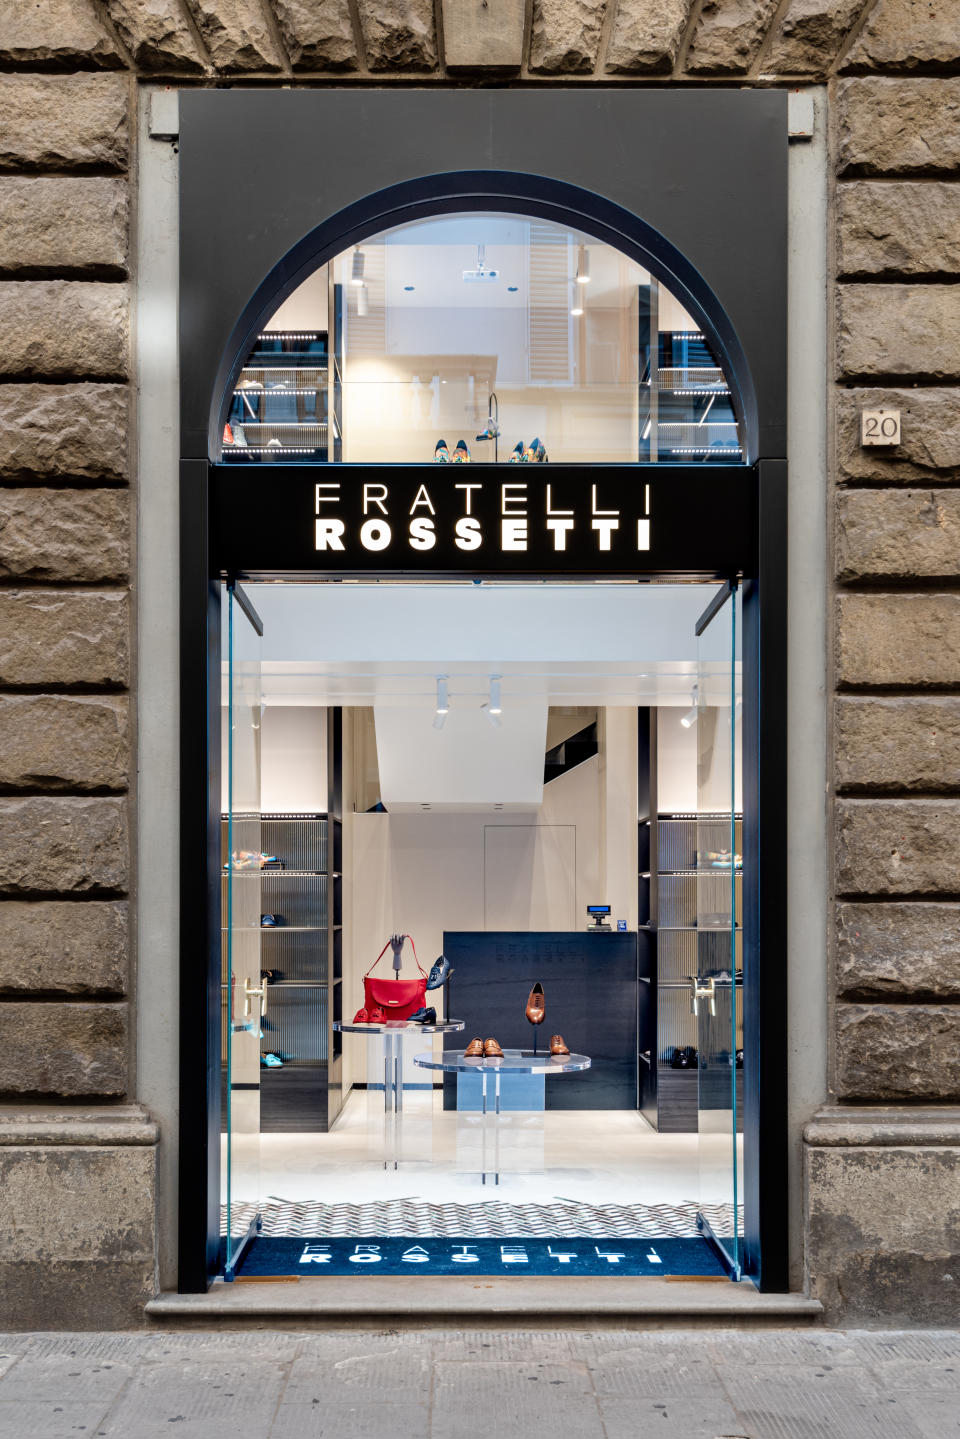 Fratelli Rossetti store in Florence